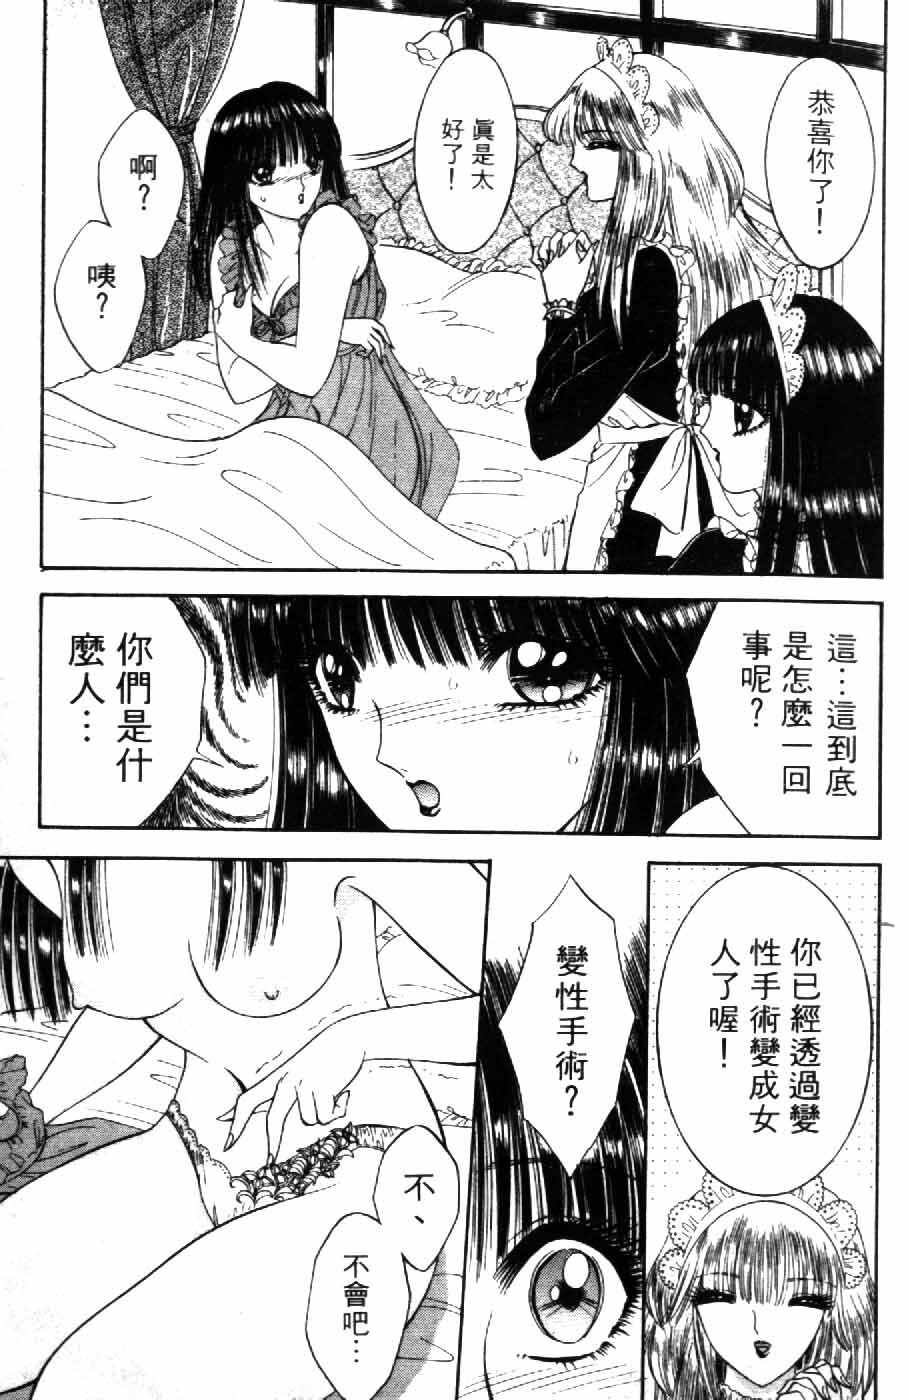 [Senno Knife] Ouma ga Horror Show 2 - Trans Sexual Special Show 2 | 顫慄博覽會 2 [Chinese] page 19 full